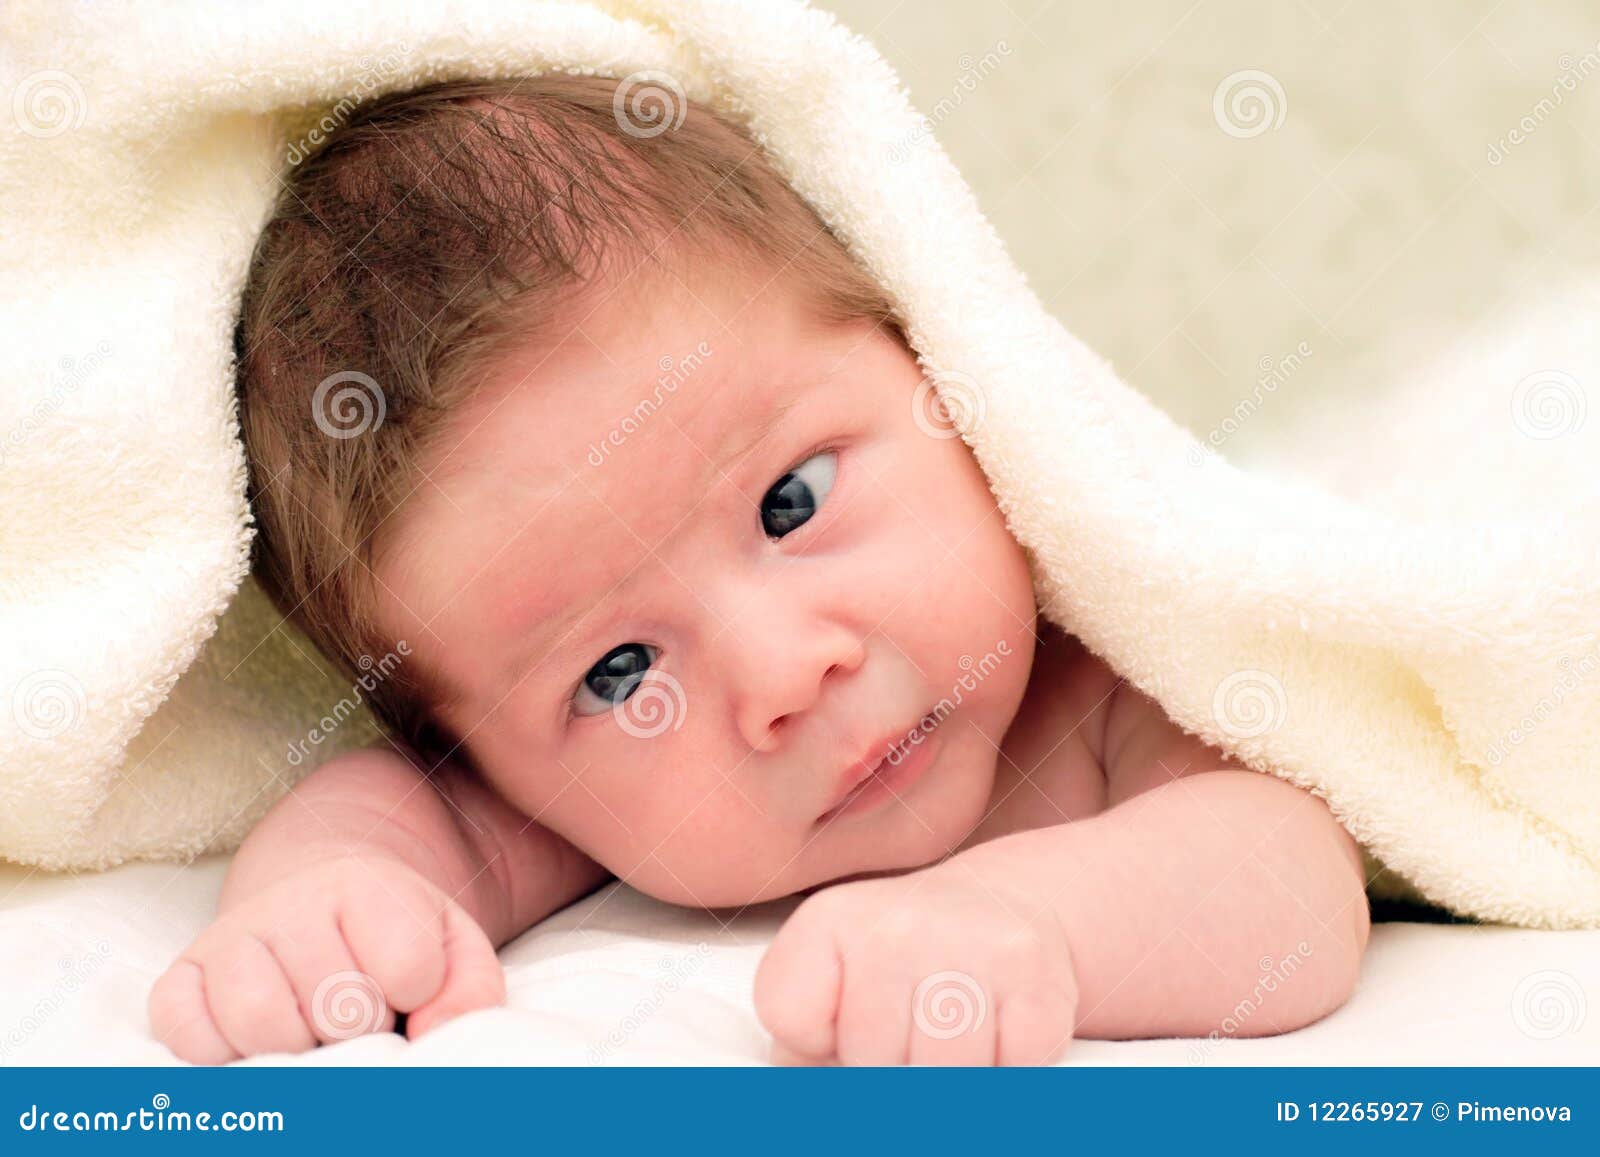 Small child stock image. Image of care, babies, close ...